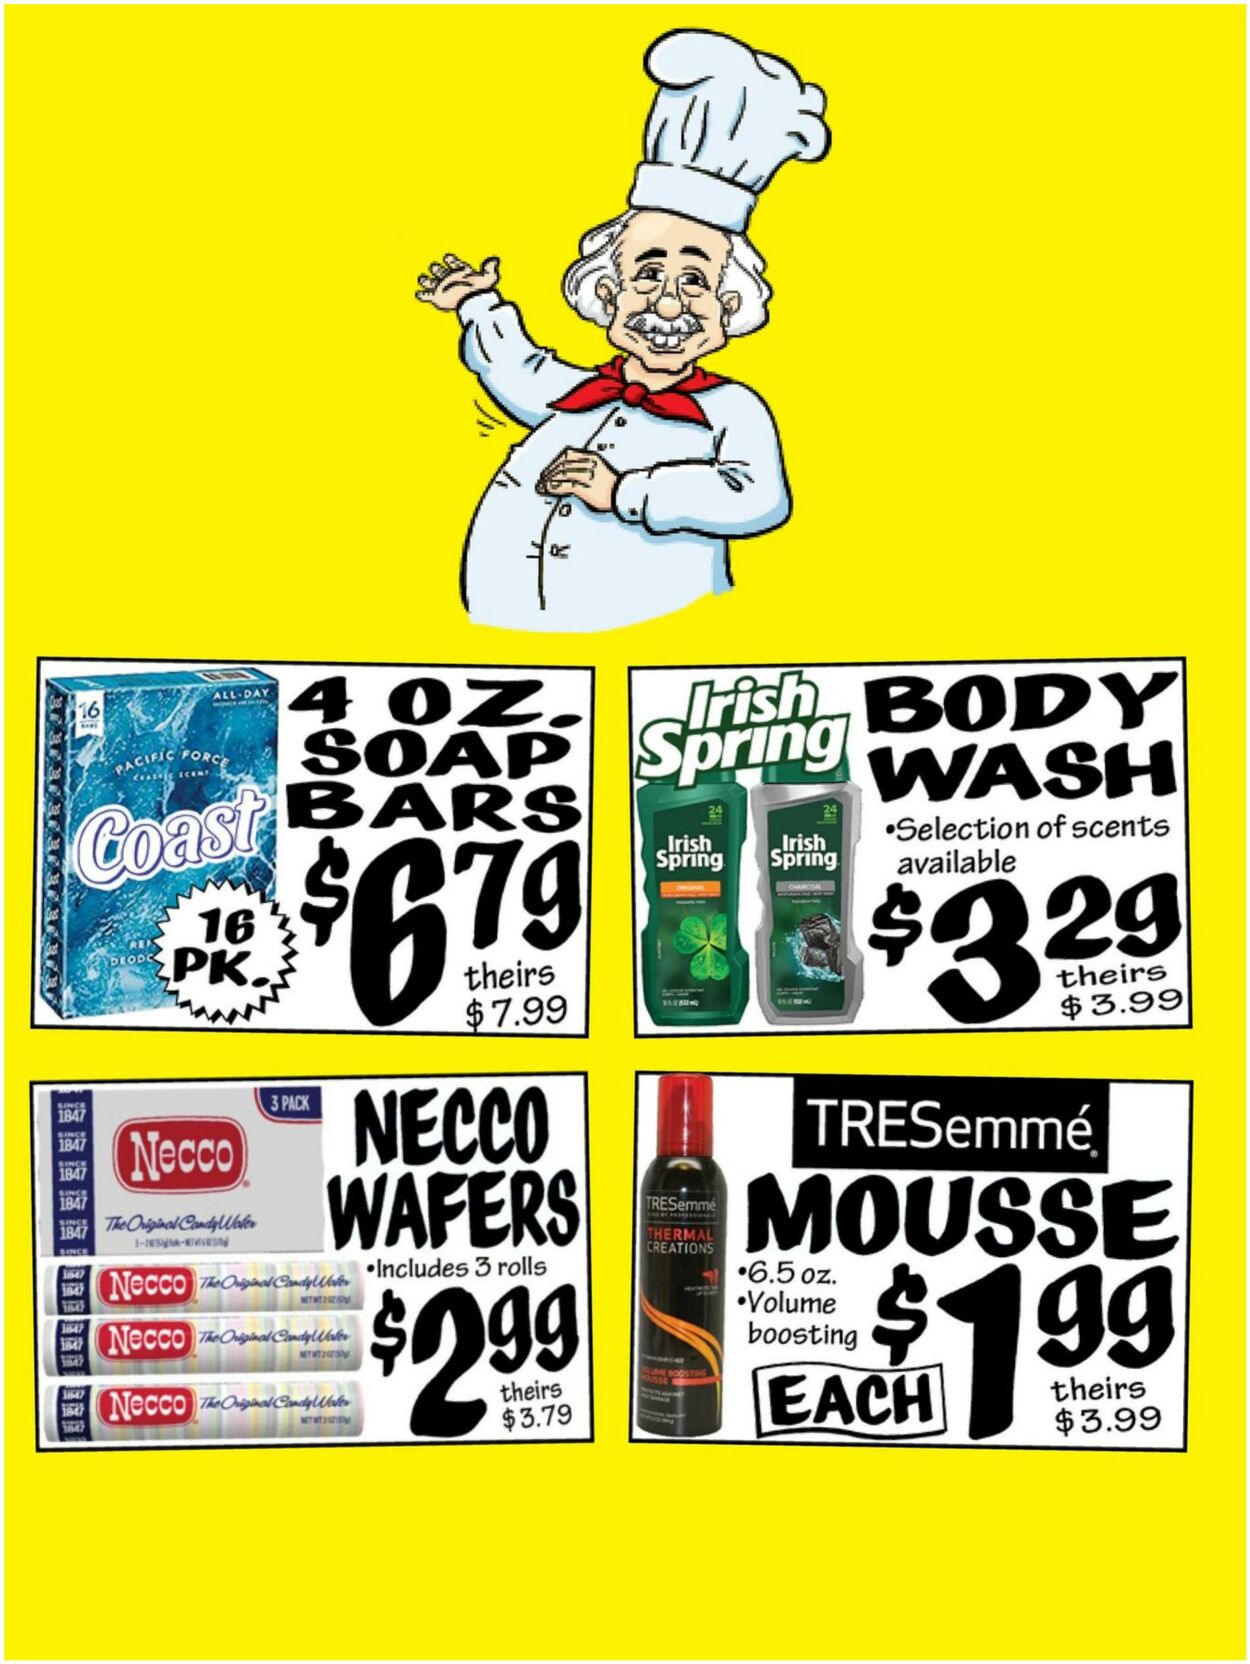 Weekly ad Ollie's 08/04/2022 - 08/09/2022